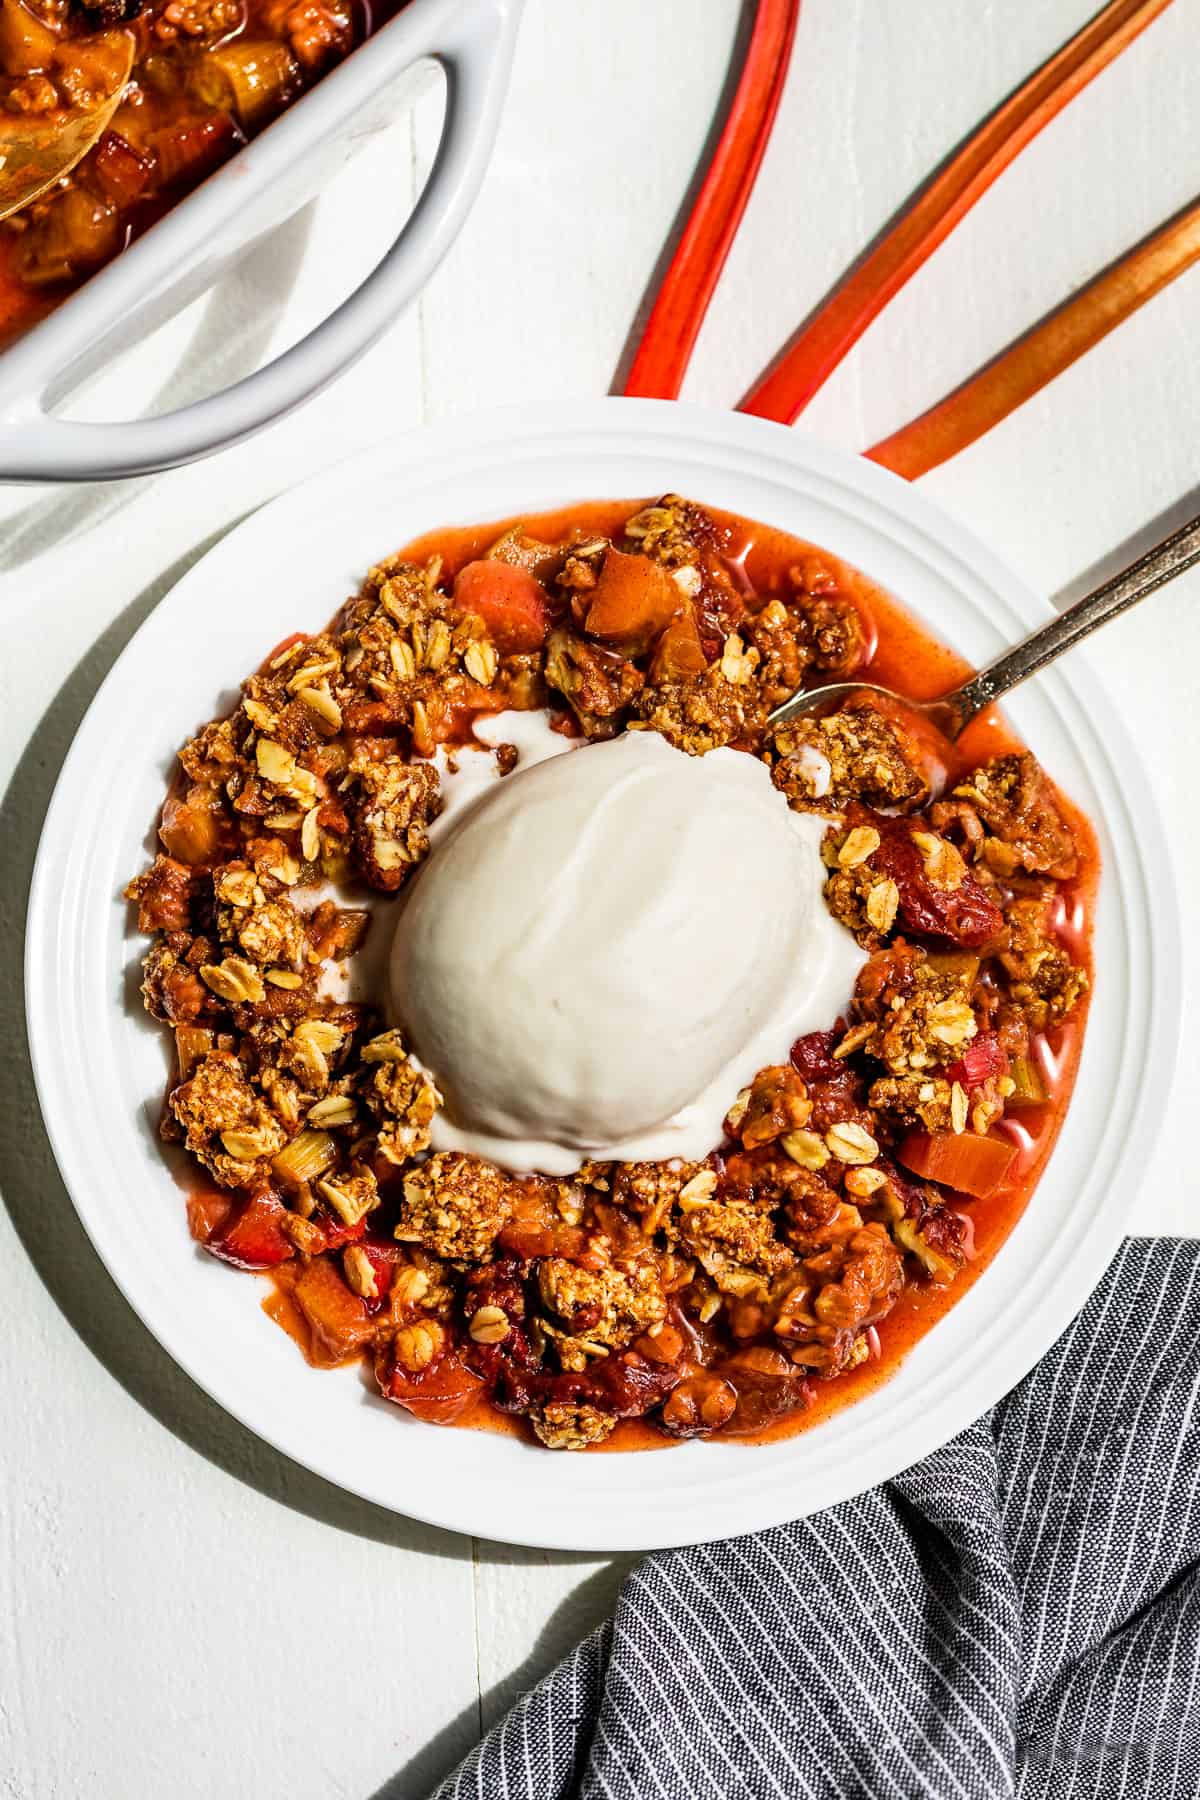 A white plate with Strawberry Rhubarb Crisp with a scoop of ice cream on top with a blue linen on the side.